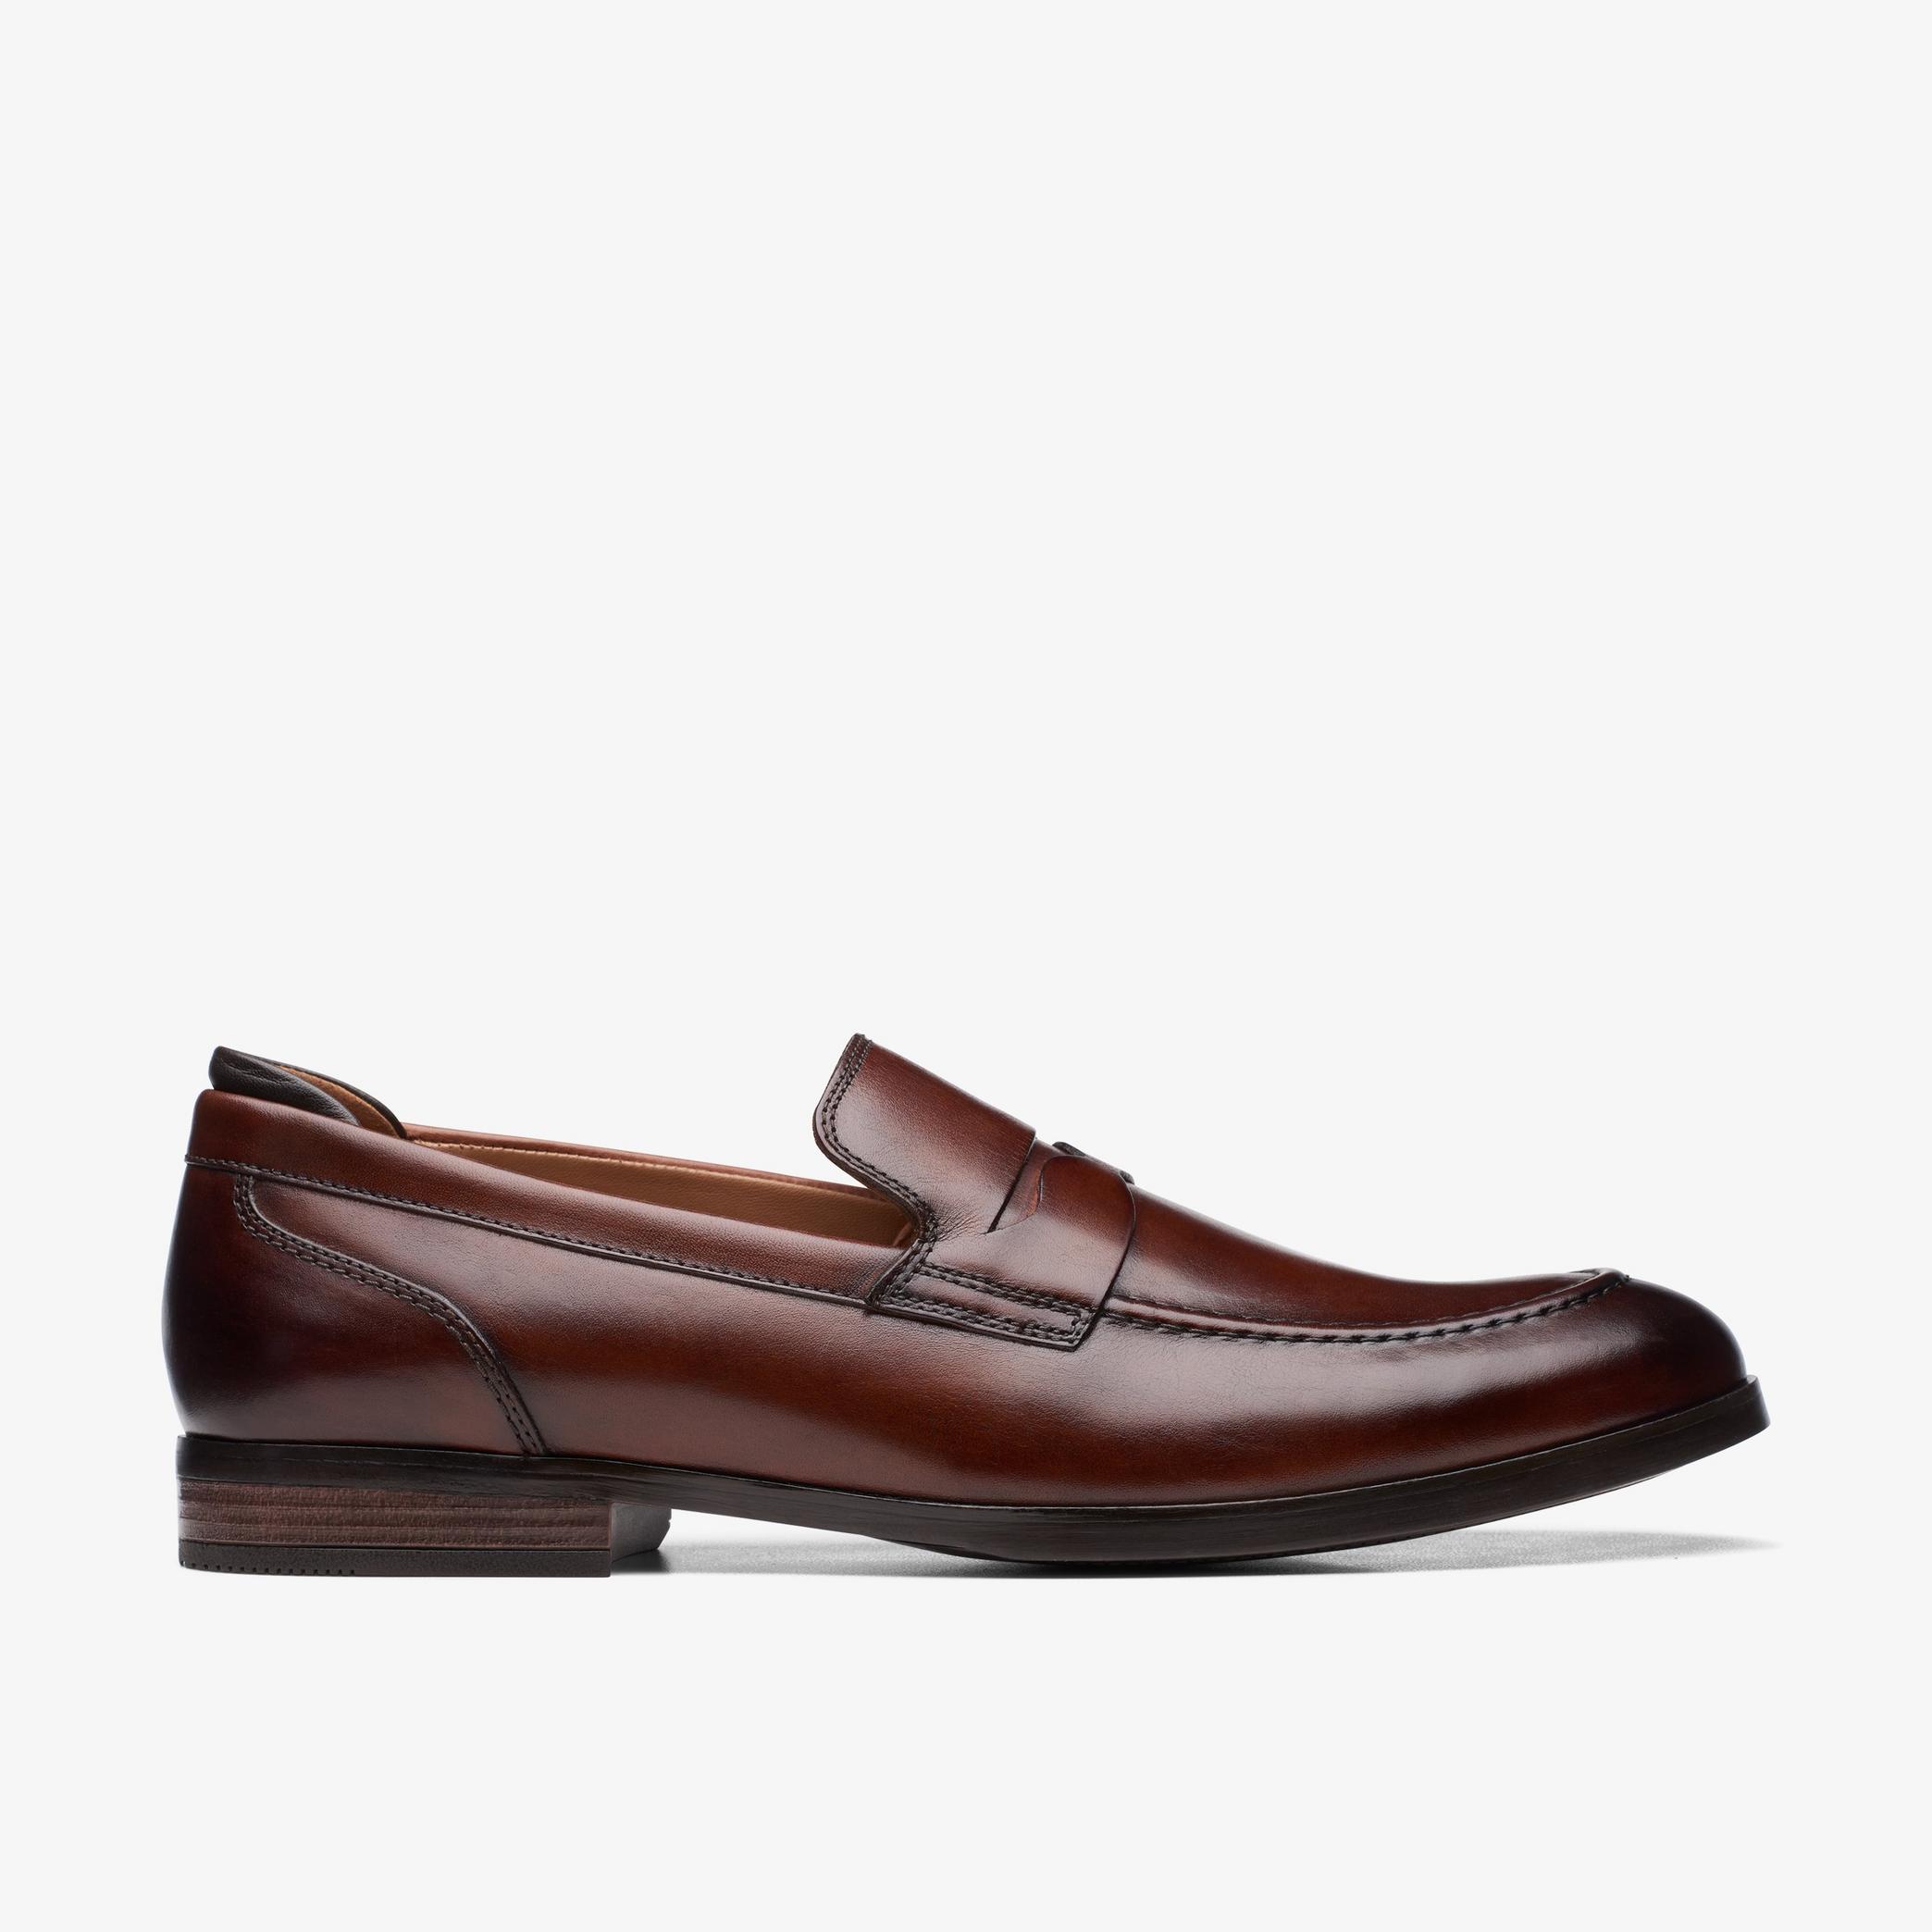 Mens Bradish Ease Tan Leather Loafers | Clarks UK